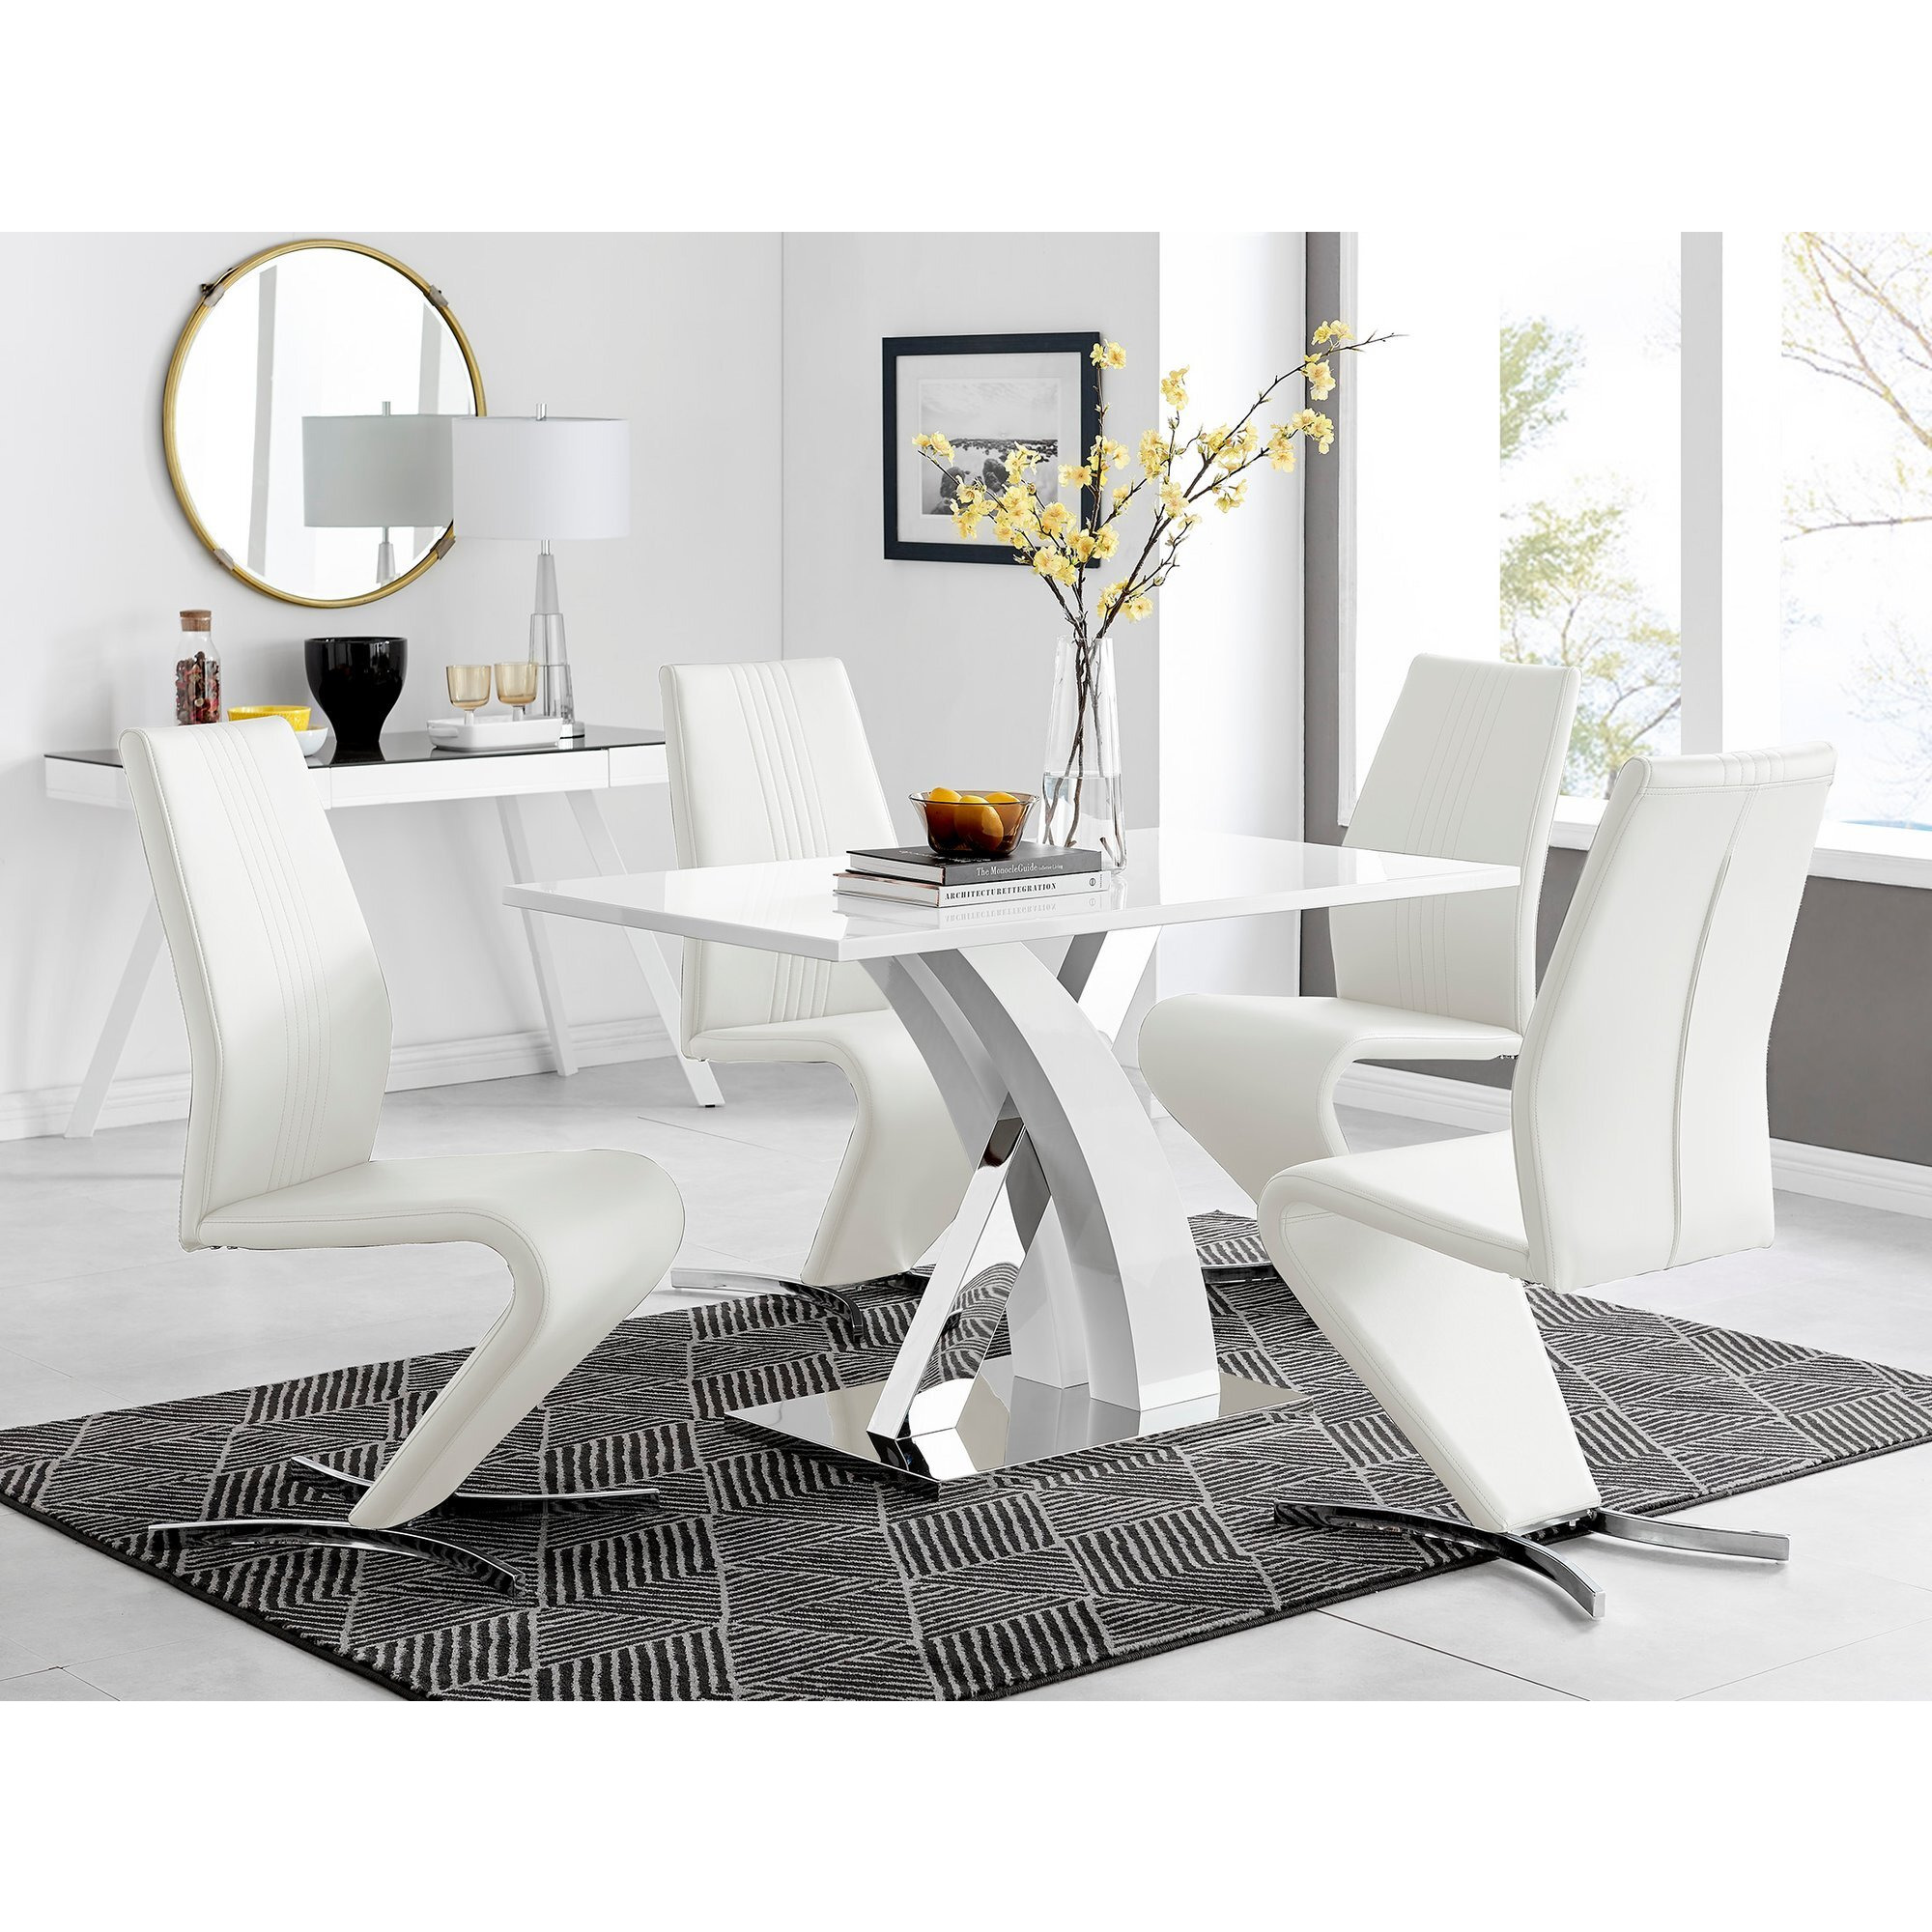 Atlanta White High Gloss And Chrome Metal Rectangle Dining Table And 4 Willow Dining Chairs Set